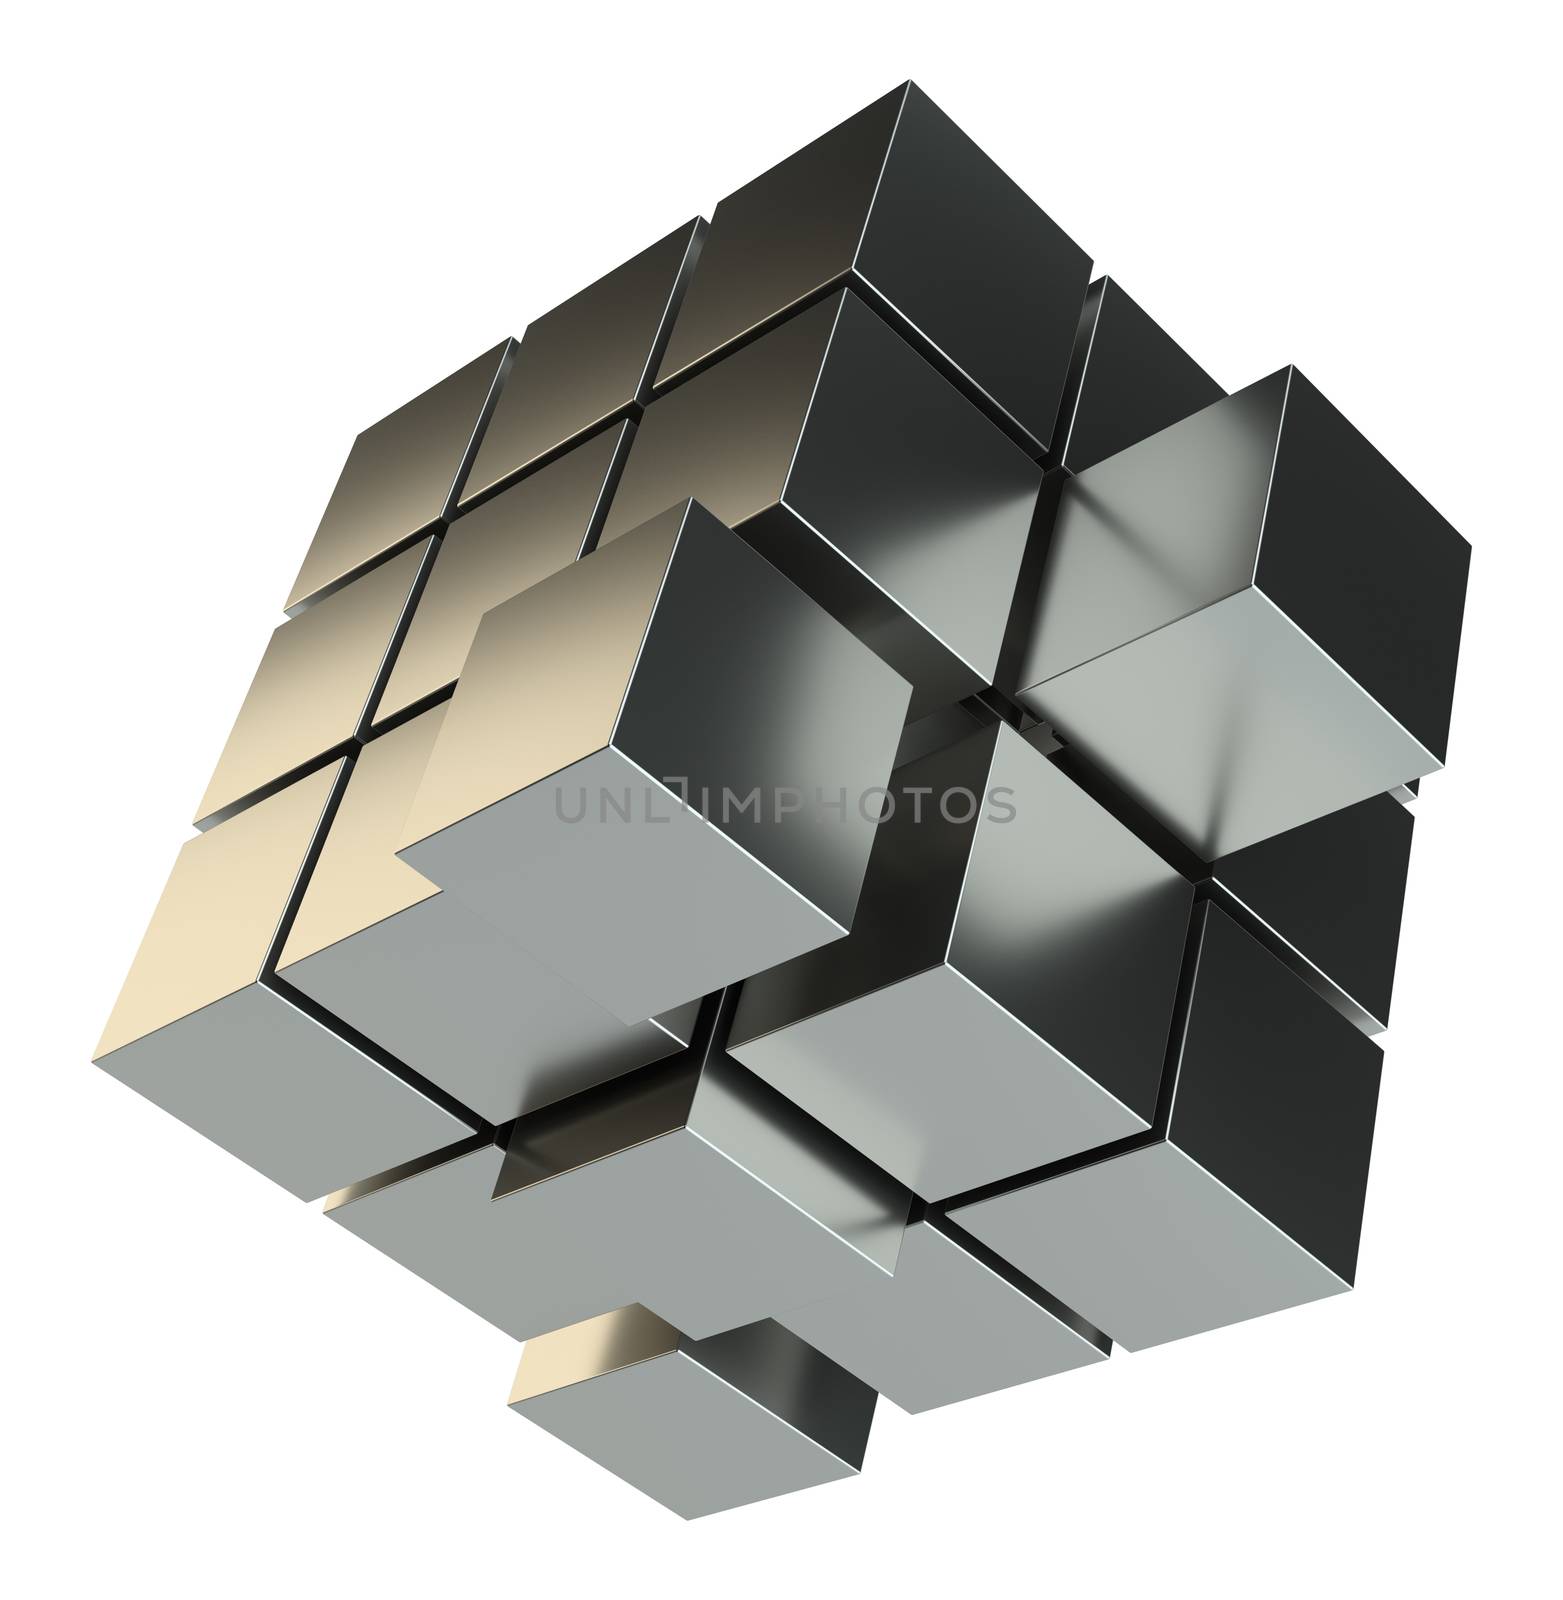 Abstract 3d illustration of cube assembling from blocks by cherezoff